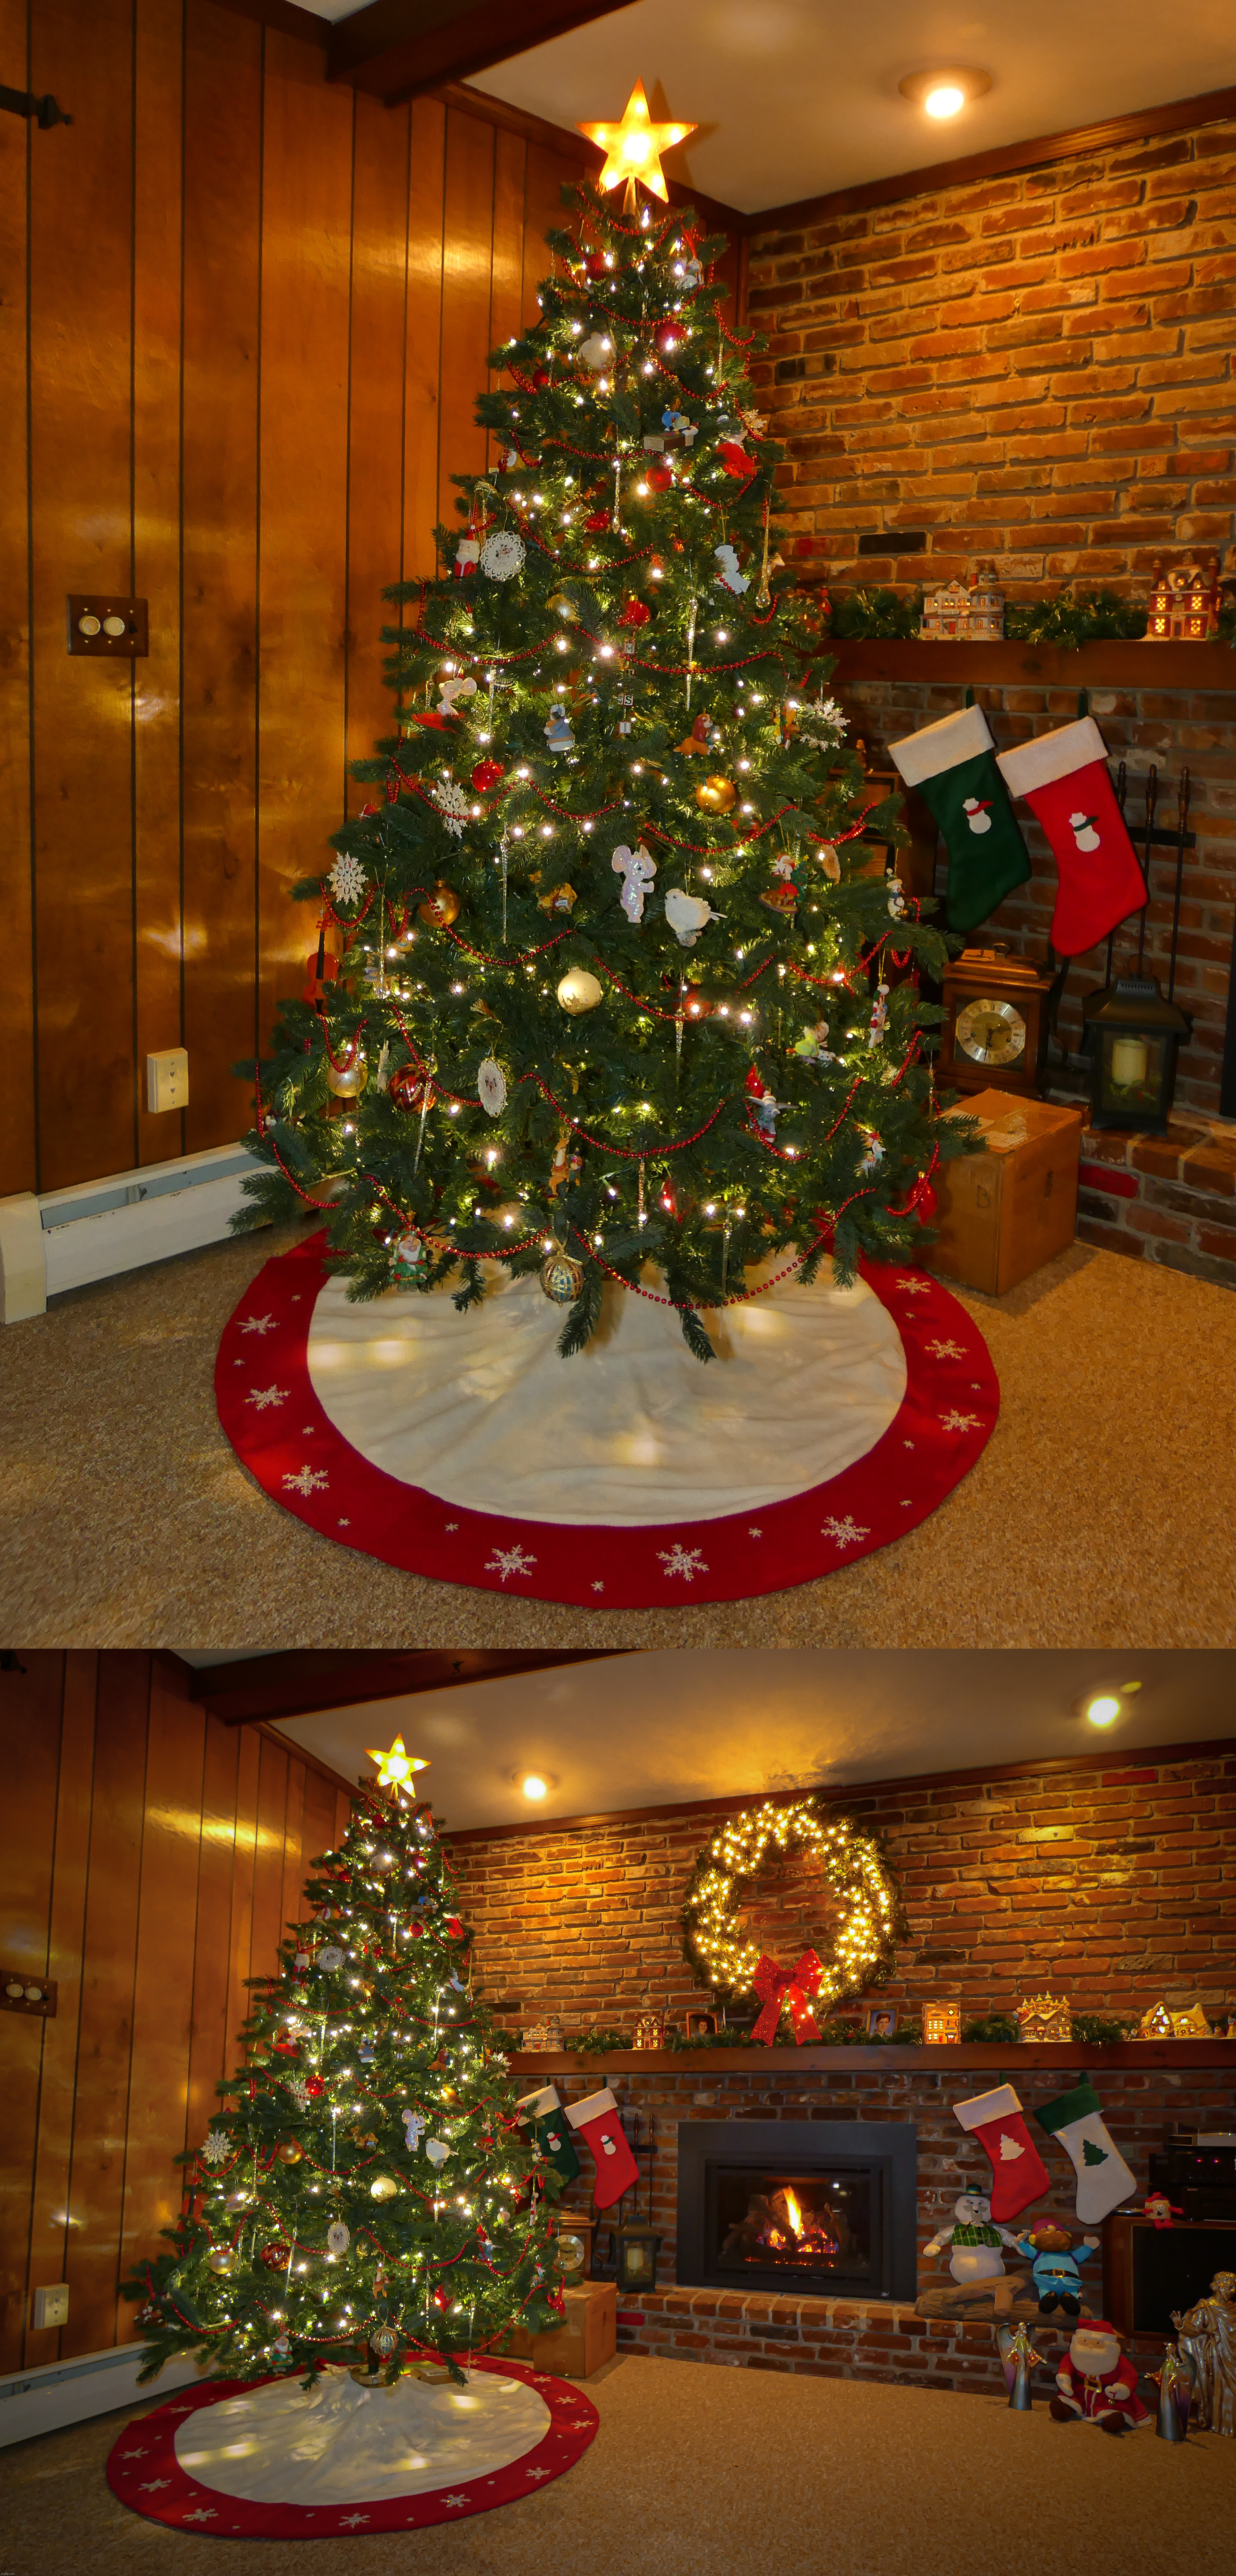 Full Christmas tree + cozy living room reveal! Merry Christmas everyone! :D | image tagged in share your own photos,christmas,merry christmas | made w/ Imgflip meme maker